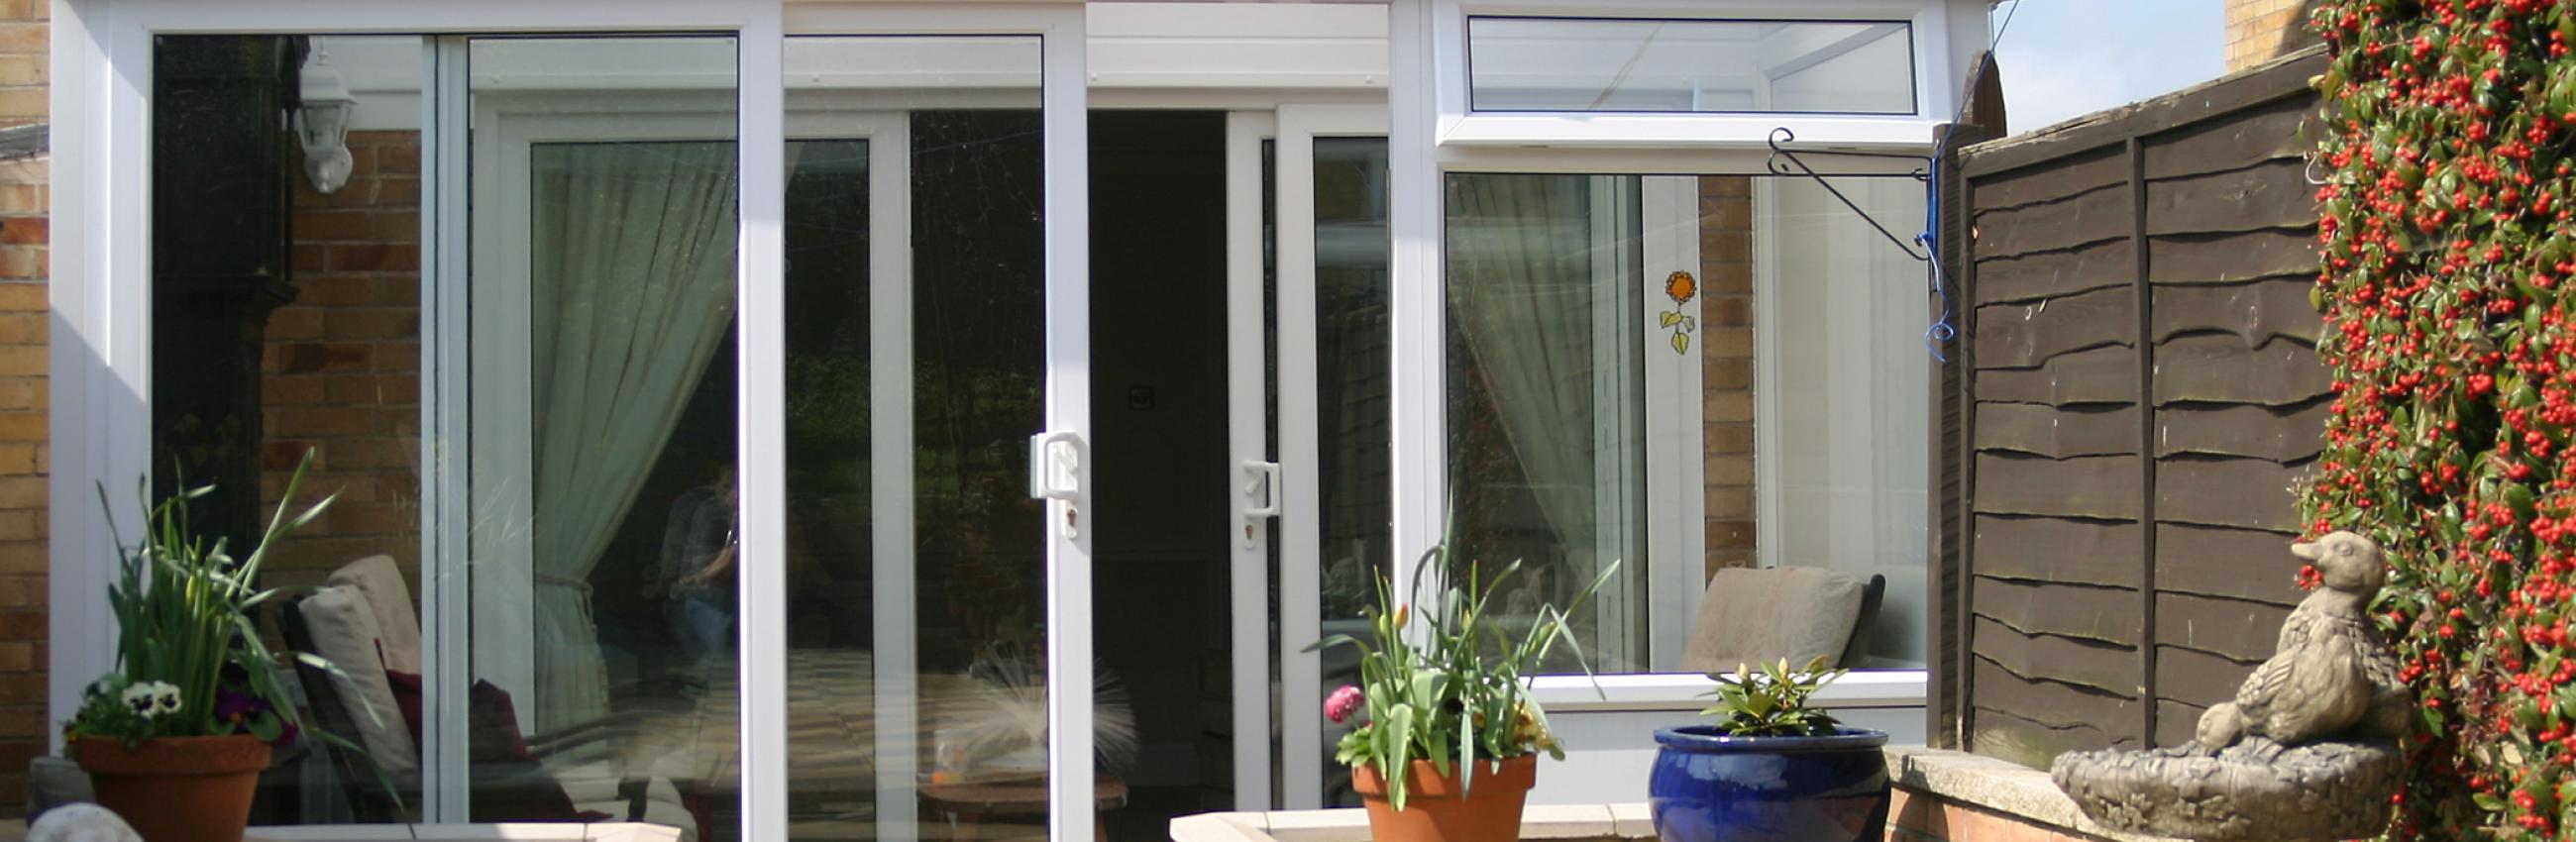 UPVC Conservatories by Alba Glass and Glazing